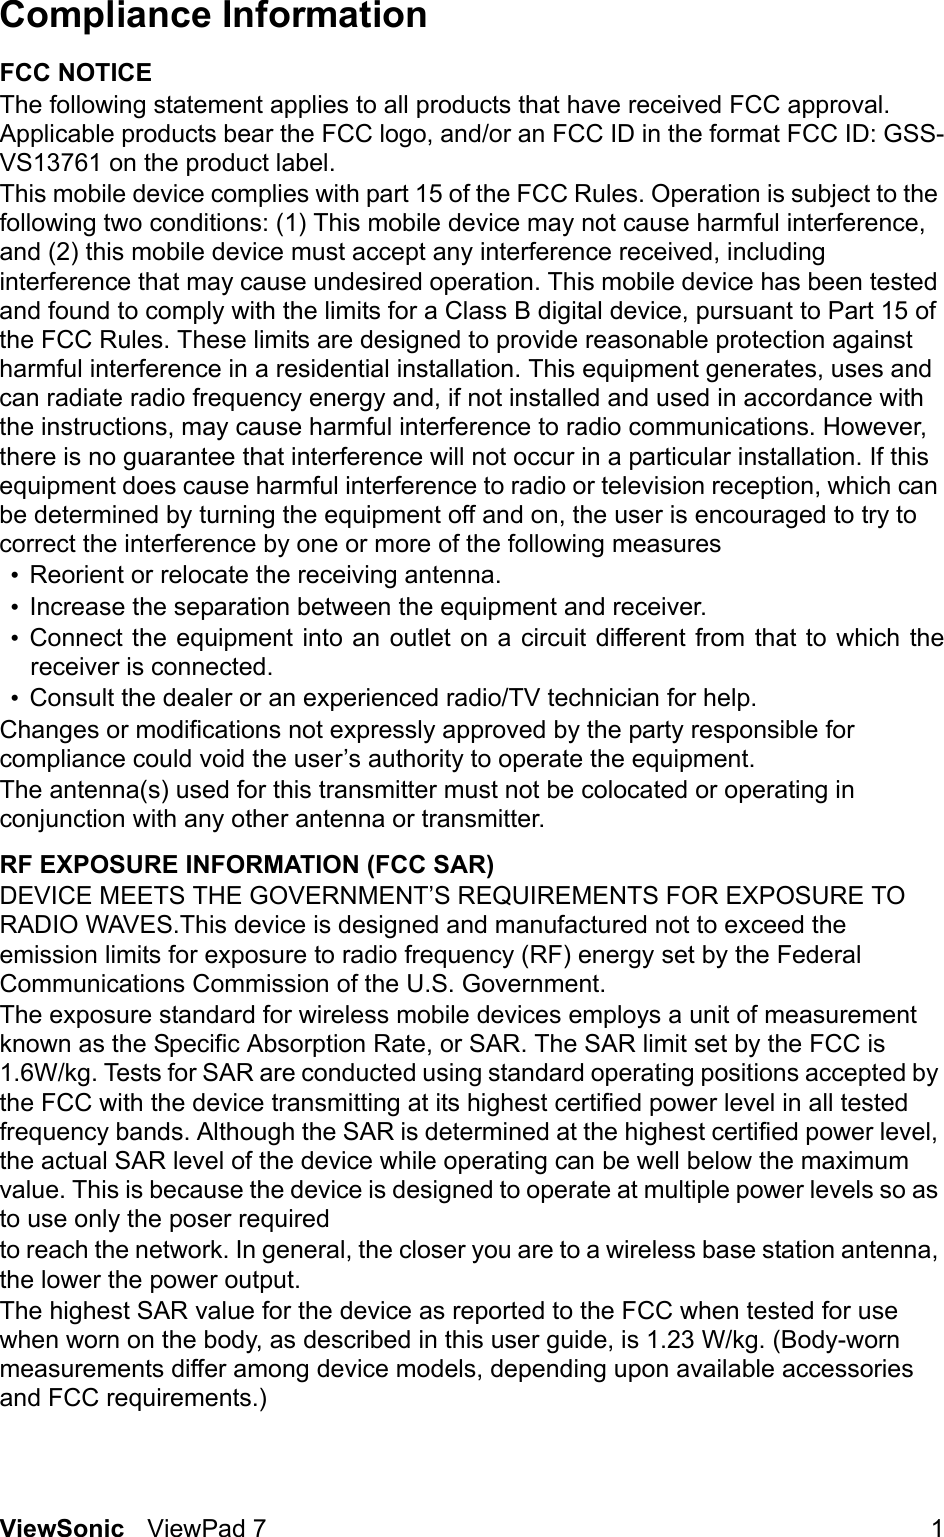 ViewSonic ViewPad 7 1Compliance Information FCC NOTICEThe following statement applies to all products that have received FCC approval. Applicable products bear the FCC logo, and/or an FCC ID in the format FCC ID: GSS-VS13761 on the product label.This mobile device complies with part 15 of the FCC Rules. Operation is subject to the following two conditions: (1) This mobile device may not cause harmful interference, and (2) this mobile device must accept any interference received, including interference that may cause undesired operation. This mobile device has been tested and found to comply with the limits for a Class B digital device, pursuant to Part 15 of the FCC Rules. These limits are designed to provide reasonable protection against harmful interference in a residential installation. This equipment generates, uses and can radiate radio frequency energy and, if not installed and used in accordance with the instructions, may cause harmful interference to radio communications. However, there is no guarantee that interference will not occur in a particular installation. If this equipment does cause harmful interference to radio or television reception, which can be determined by turning the equipment off and on, the user is encouraged to try to correct the interference by one or more of the following measures•Reorient or relocate the receiving antenna.•Increase the separation between the equipment and receiver.•Connect the equipment into an outlet on a circuit different from that to which thereceiver is connected.•Consult the dealer or an experienced radio/TV technician for help.Changes or modifications not expressly approved by the party responsible for compliance could void the user’s authority to operate the equipment.The antenna(s) used for this transmitter must not be colocated or operating in conjunction with any other antenna or transmitter.RF EXPOSURE INFORMATION (FCC SAR)DEVICE MEETS THE GOVERNMENT’S REQUIREMENTS FOR EXPOSURE TO RADIO WAVES.This device is designed and manufactured not to exceed the emission limits for exposure to radio frequency (RF) energy set by the Federal Communications Commission of the U.S. Government.The exposure standard for wireless mobile devices employs a unit of measurement known as the Specific Absorption Rate, or SAR. The SAR limit set by the FCC is 1.6W/kg. Tests for SAR are conducted using standard operating positions accepted by the FCC with the device transmitting at its highest certified power level in all tested frequency bands. Although the SAR is determined at the highest certified power level, the actual SAR level of the device while operating can be well below the maximum value. This is because the device is designed to operate at multiple power levels so as to use only the poser requiredto reach the network. In general, the closer you are to a wireless base station antenna, the lower the power output.The highest SAR value for the device as reported to the FCC when tested for use when worn on the body, as described in this user guide, is 1.23 W/kg. (Body-worn measurements differ among device models, depending upon available accessories and FCC requirements.)